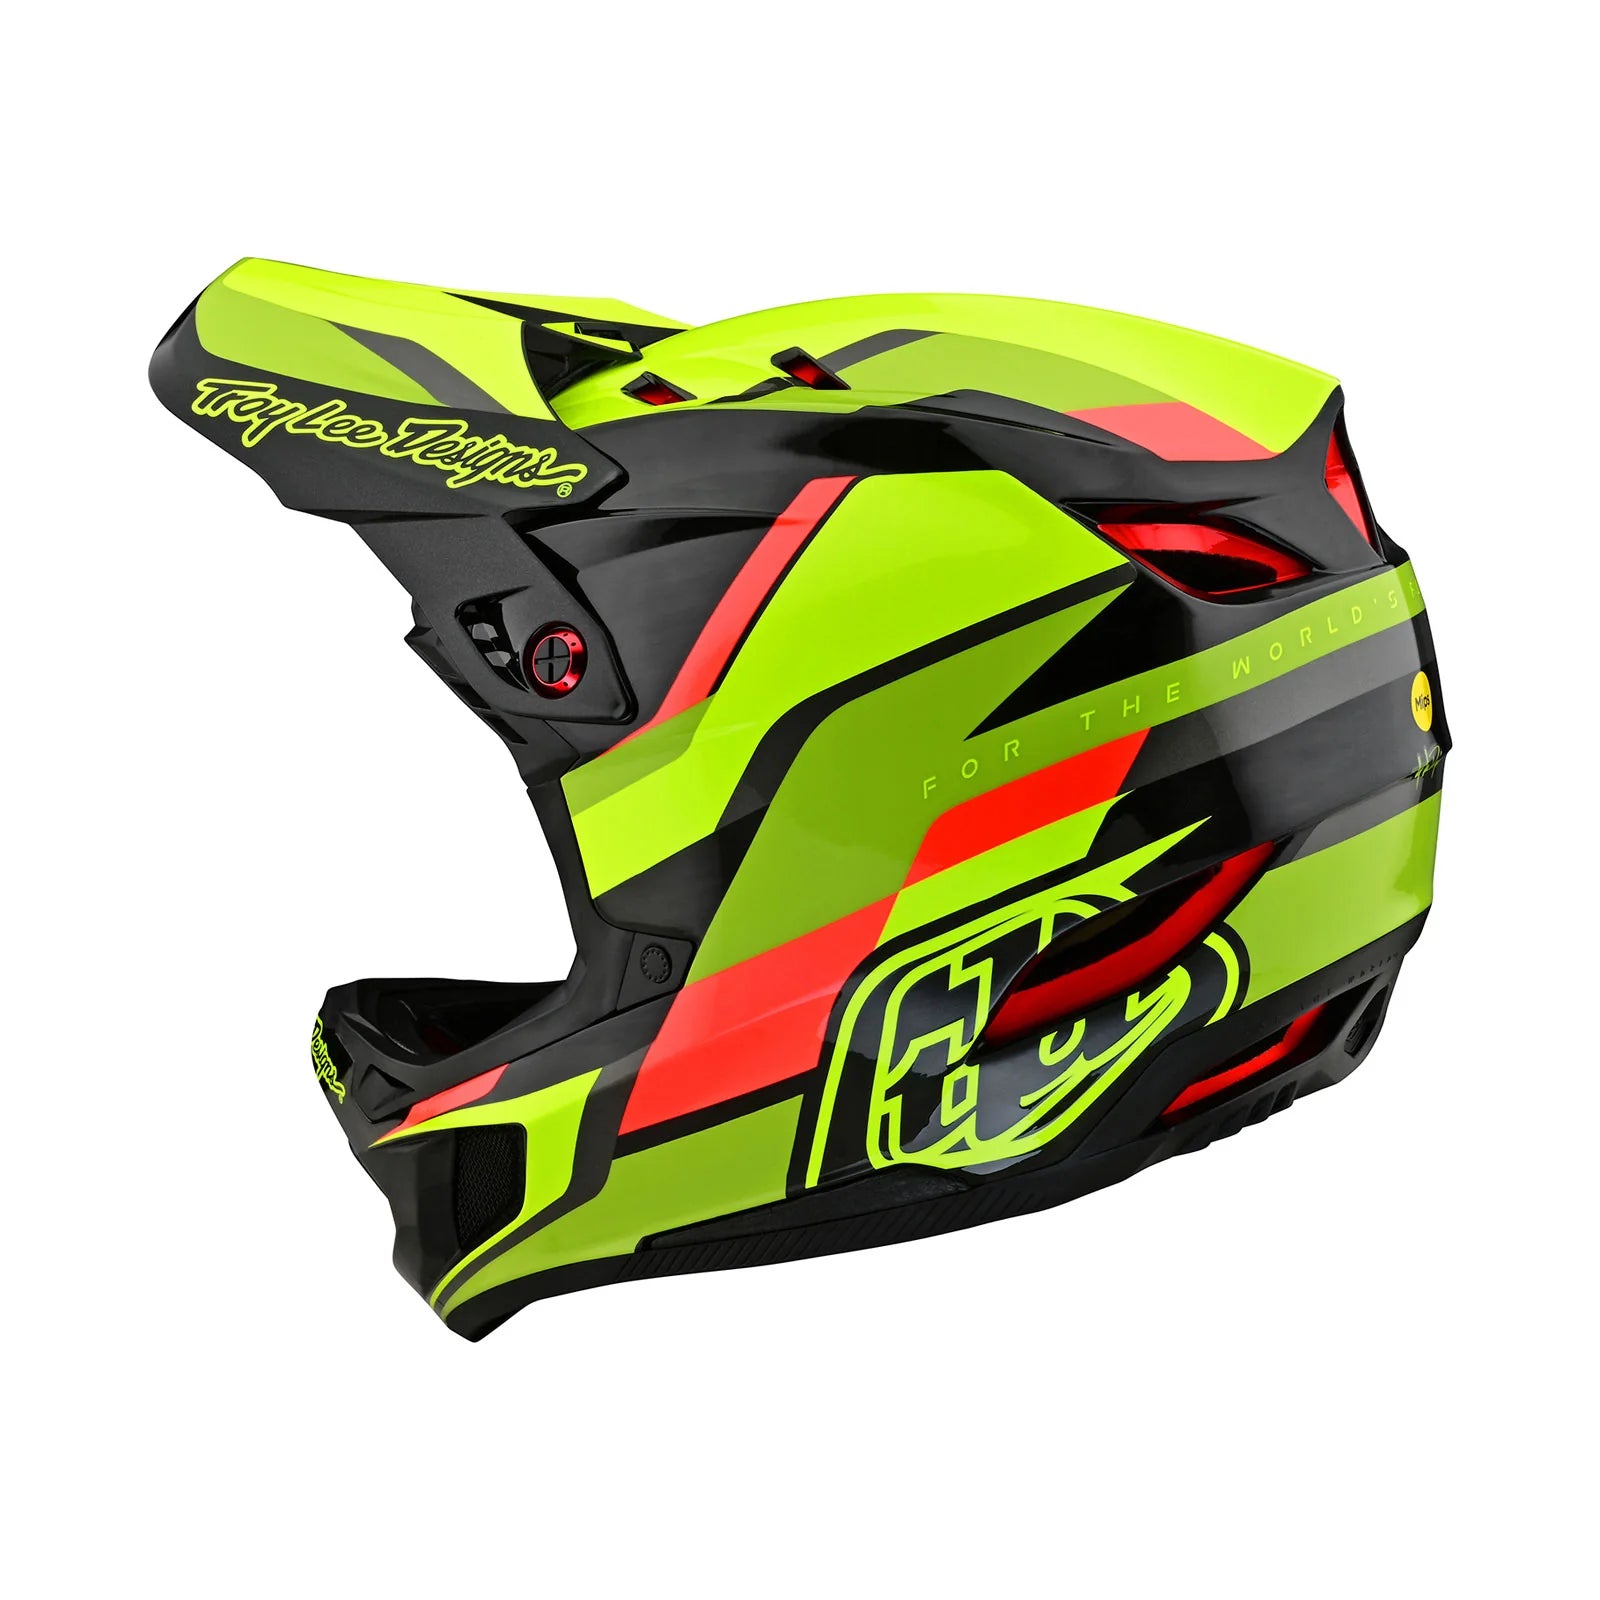 A TLD D4 Carbon AS helmet with a black and yellow design.